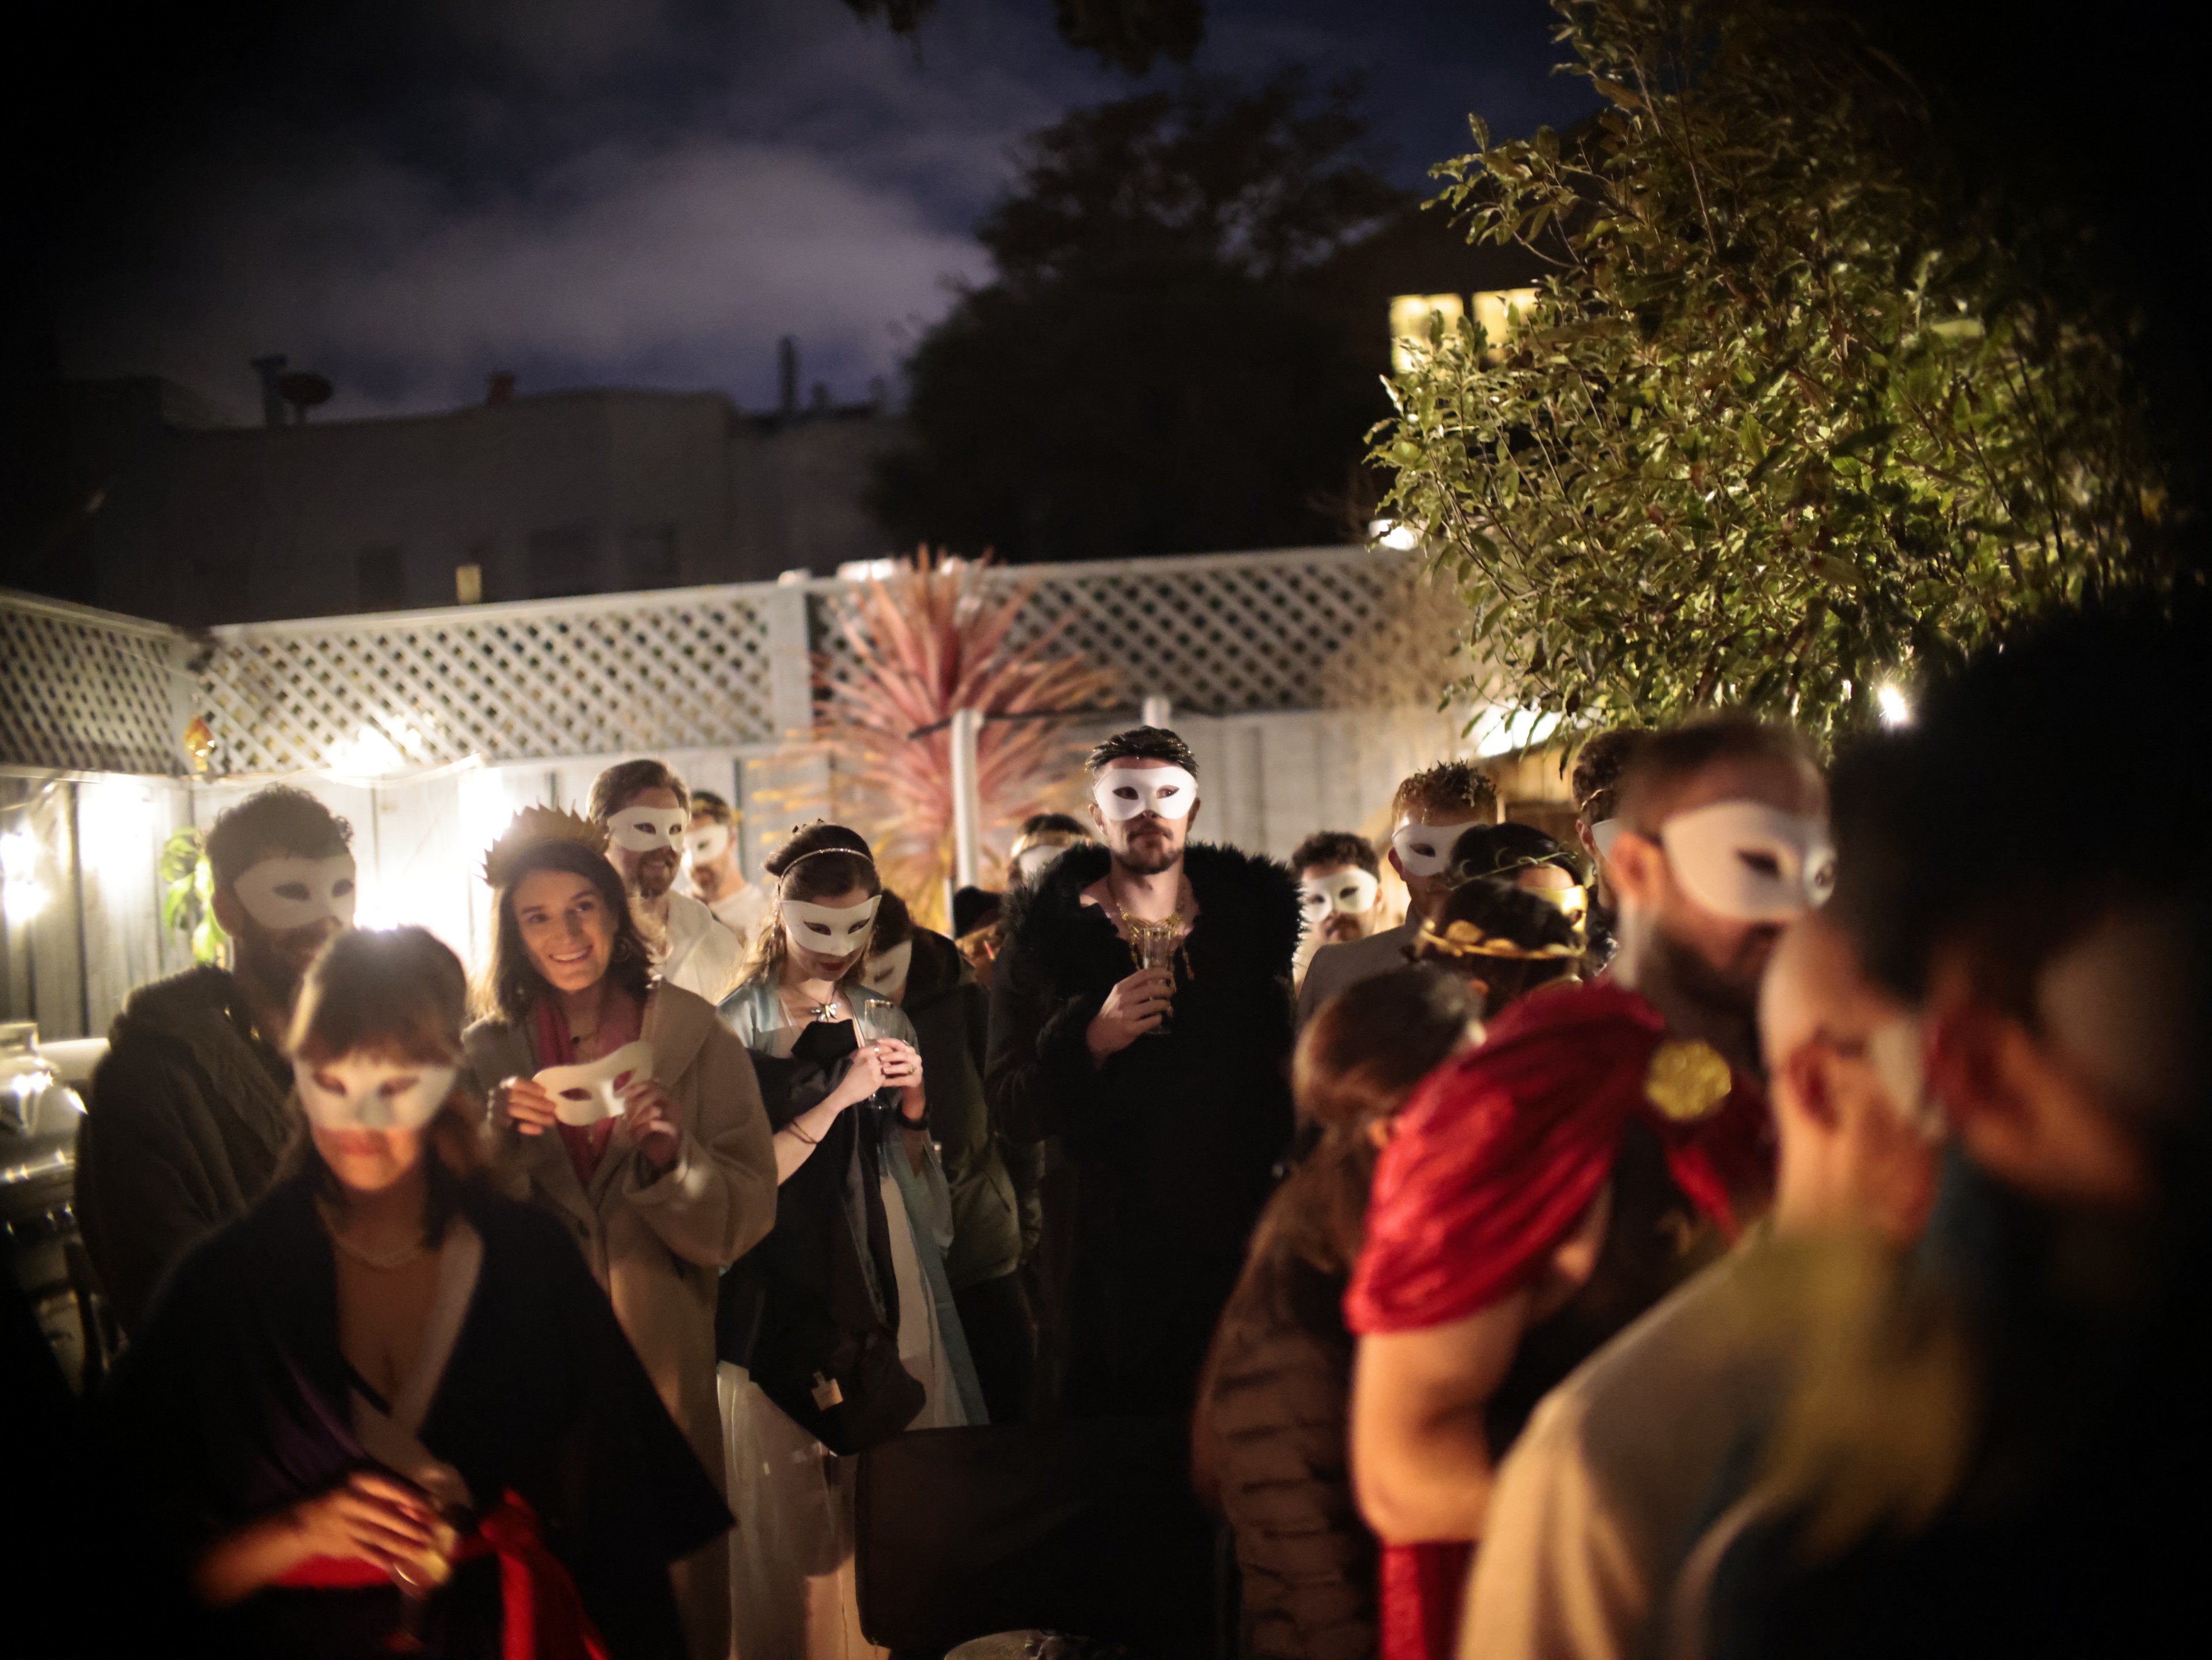 A nighttime gathering of people wearing masks, with soft lighting and a tree in the background.